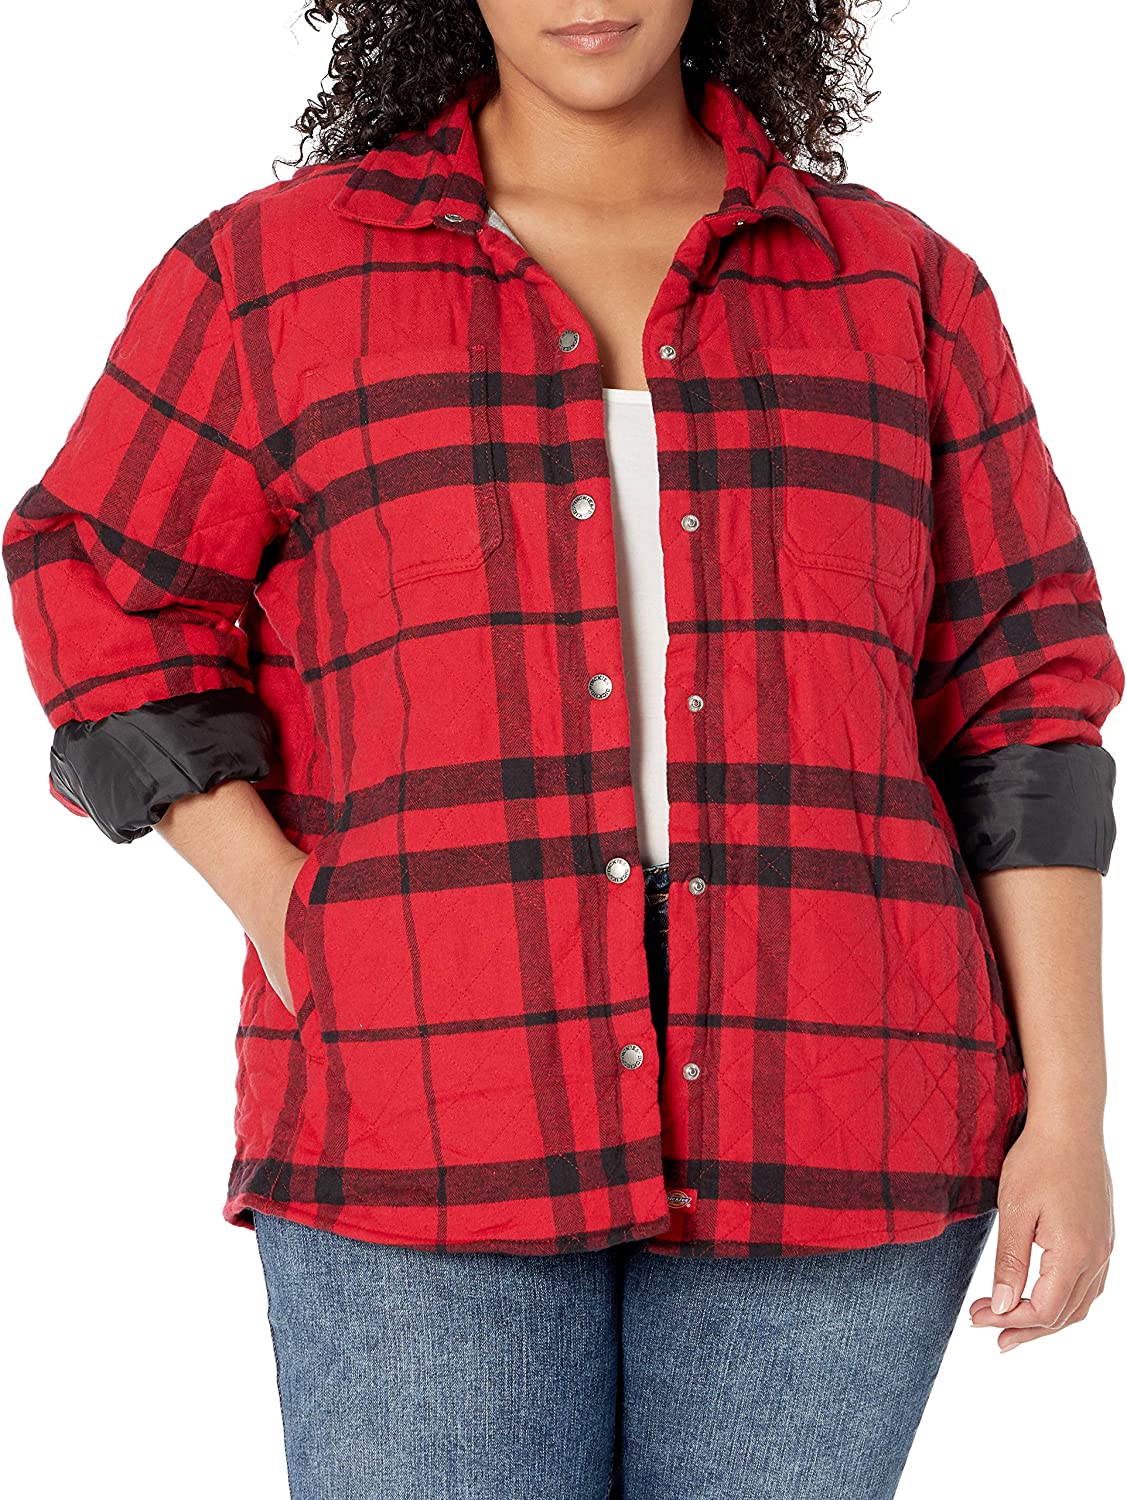 Dickies Women's Plus Size Quilted Flannel Shirt Jacket | eBay